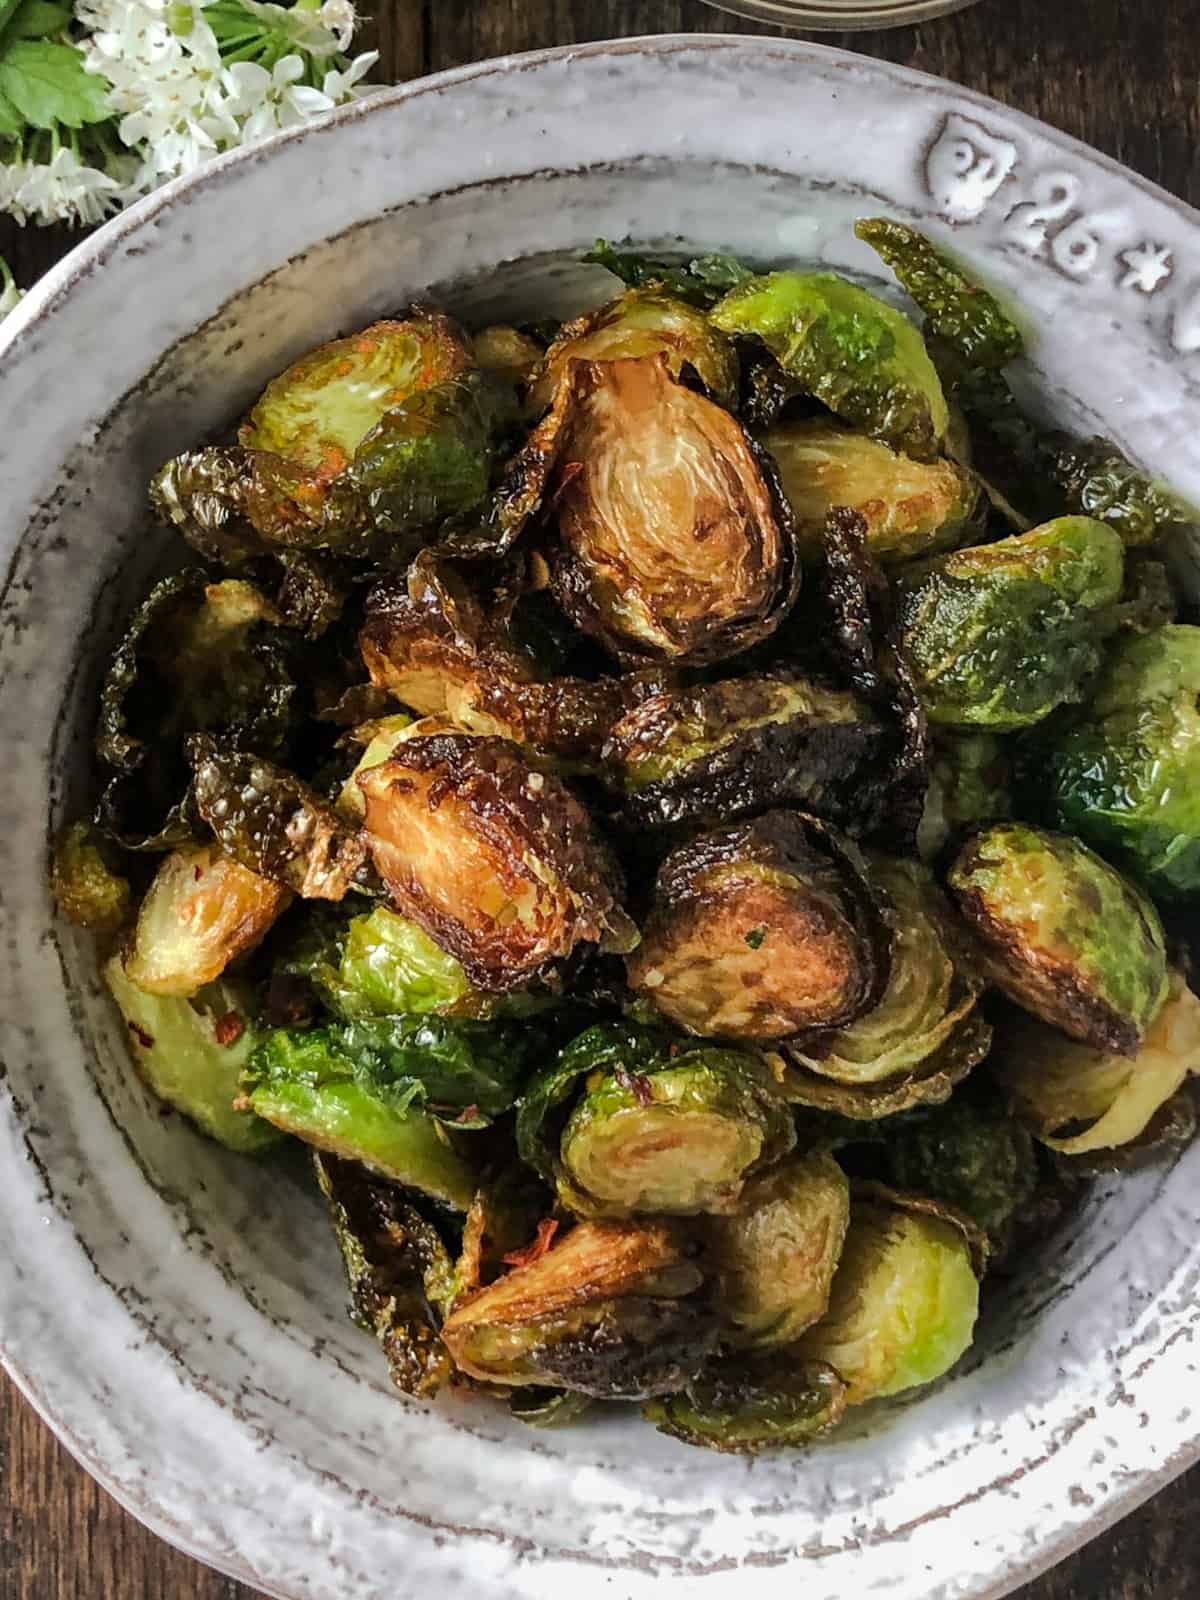 Bowlful of crispy fried Brussel sprouts.